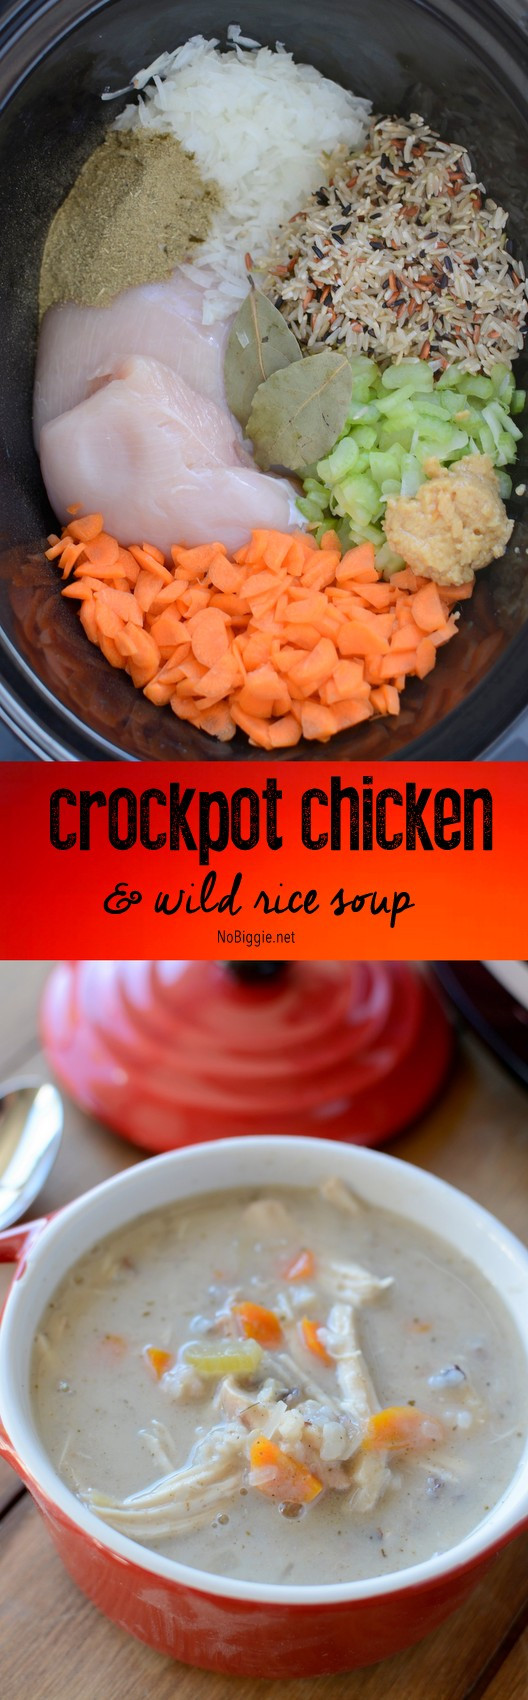 Chicken And Wild Rice Soup Crock Pot
 Creamy Crockpot Chicken and Wild Rice Soup